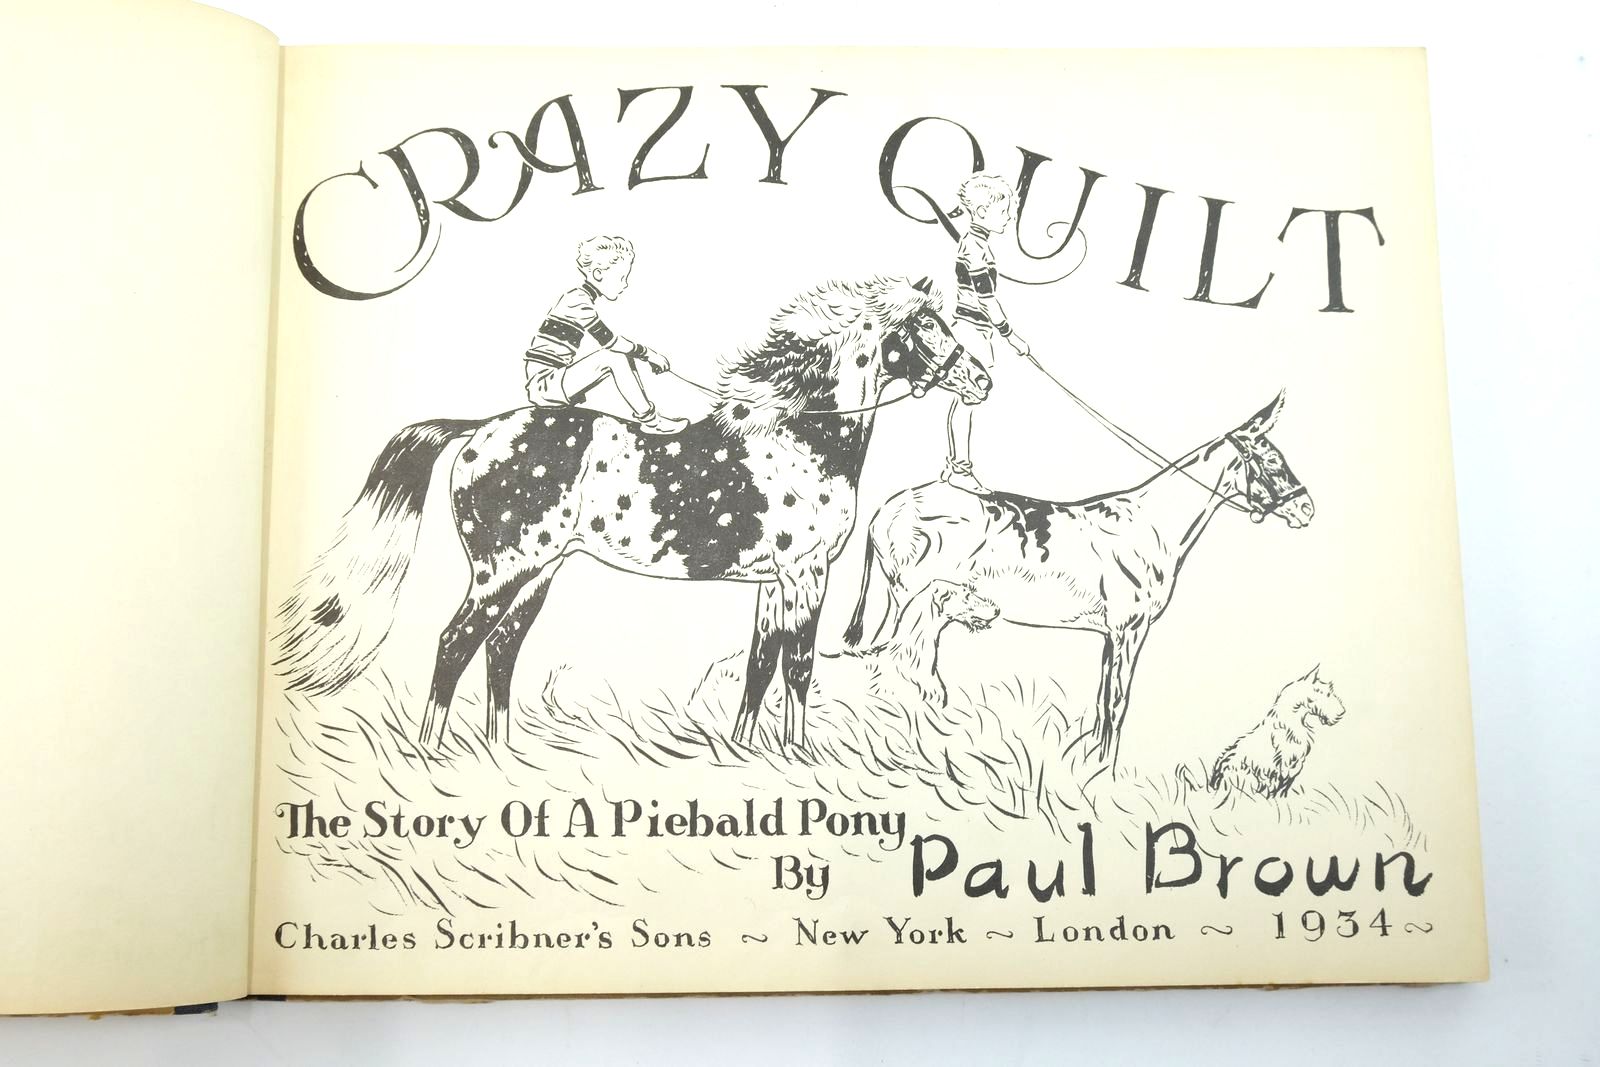 Photo of CRAZY QUILT: THE STORY OF A PIEBALD PONY written by Brown, Paul illustrated by Brown, Paul published by Charles Scribner's Sons (STOCK CODE: 2140384)  for sale by Stella & Rose's Books